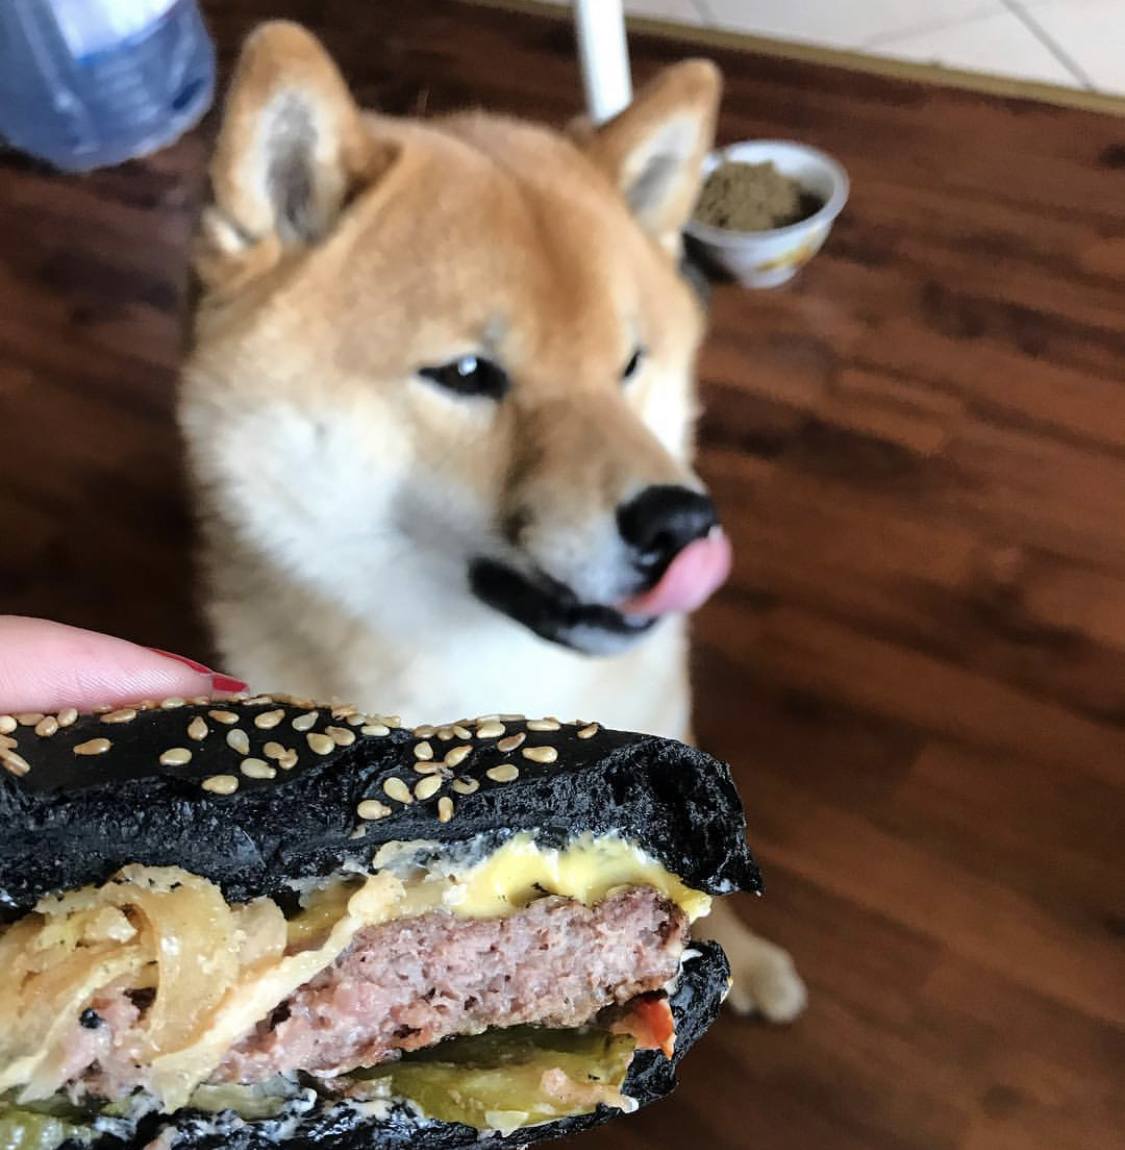 A Shiba Inu sitting on the floor behind the sandwich while licking its mouth